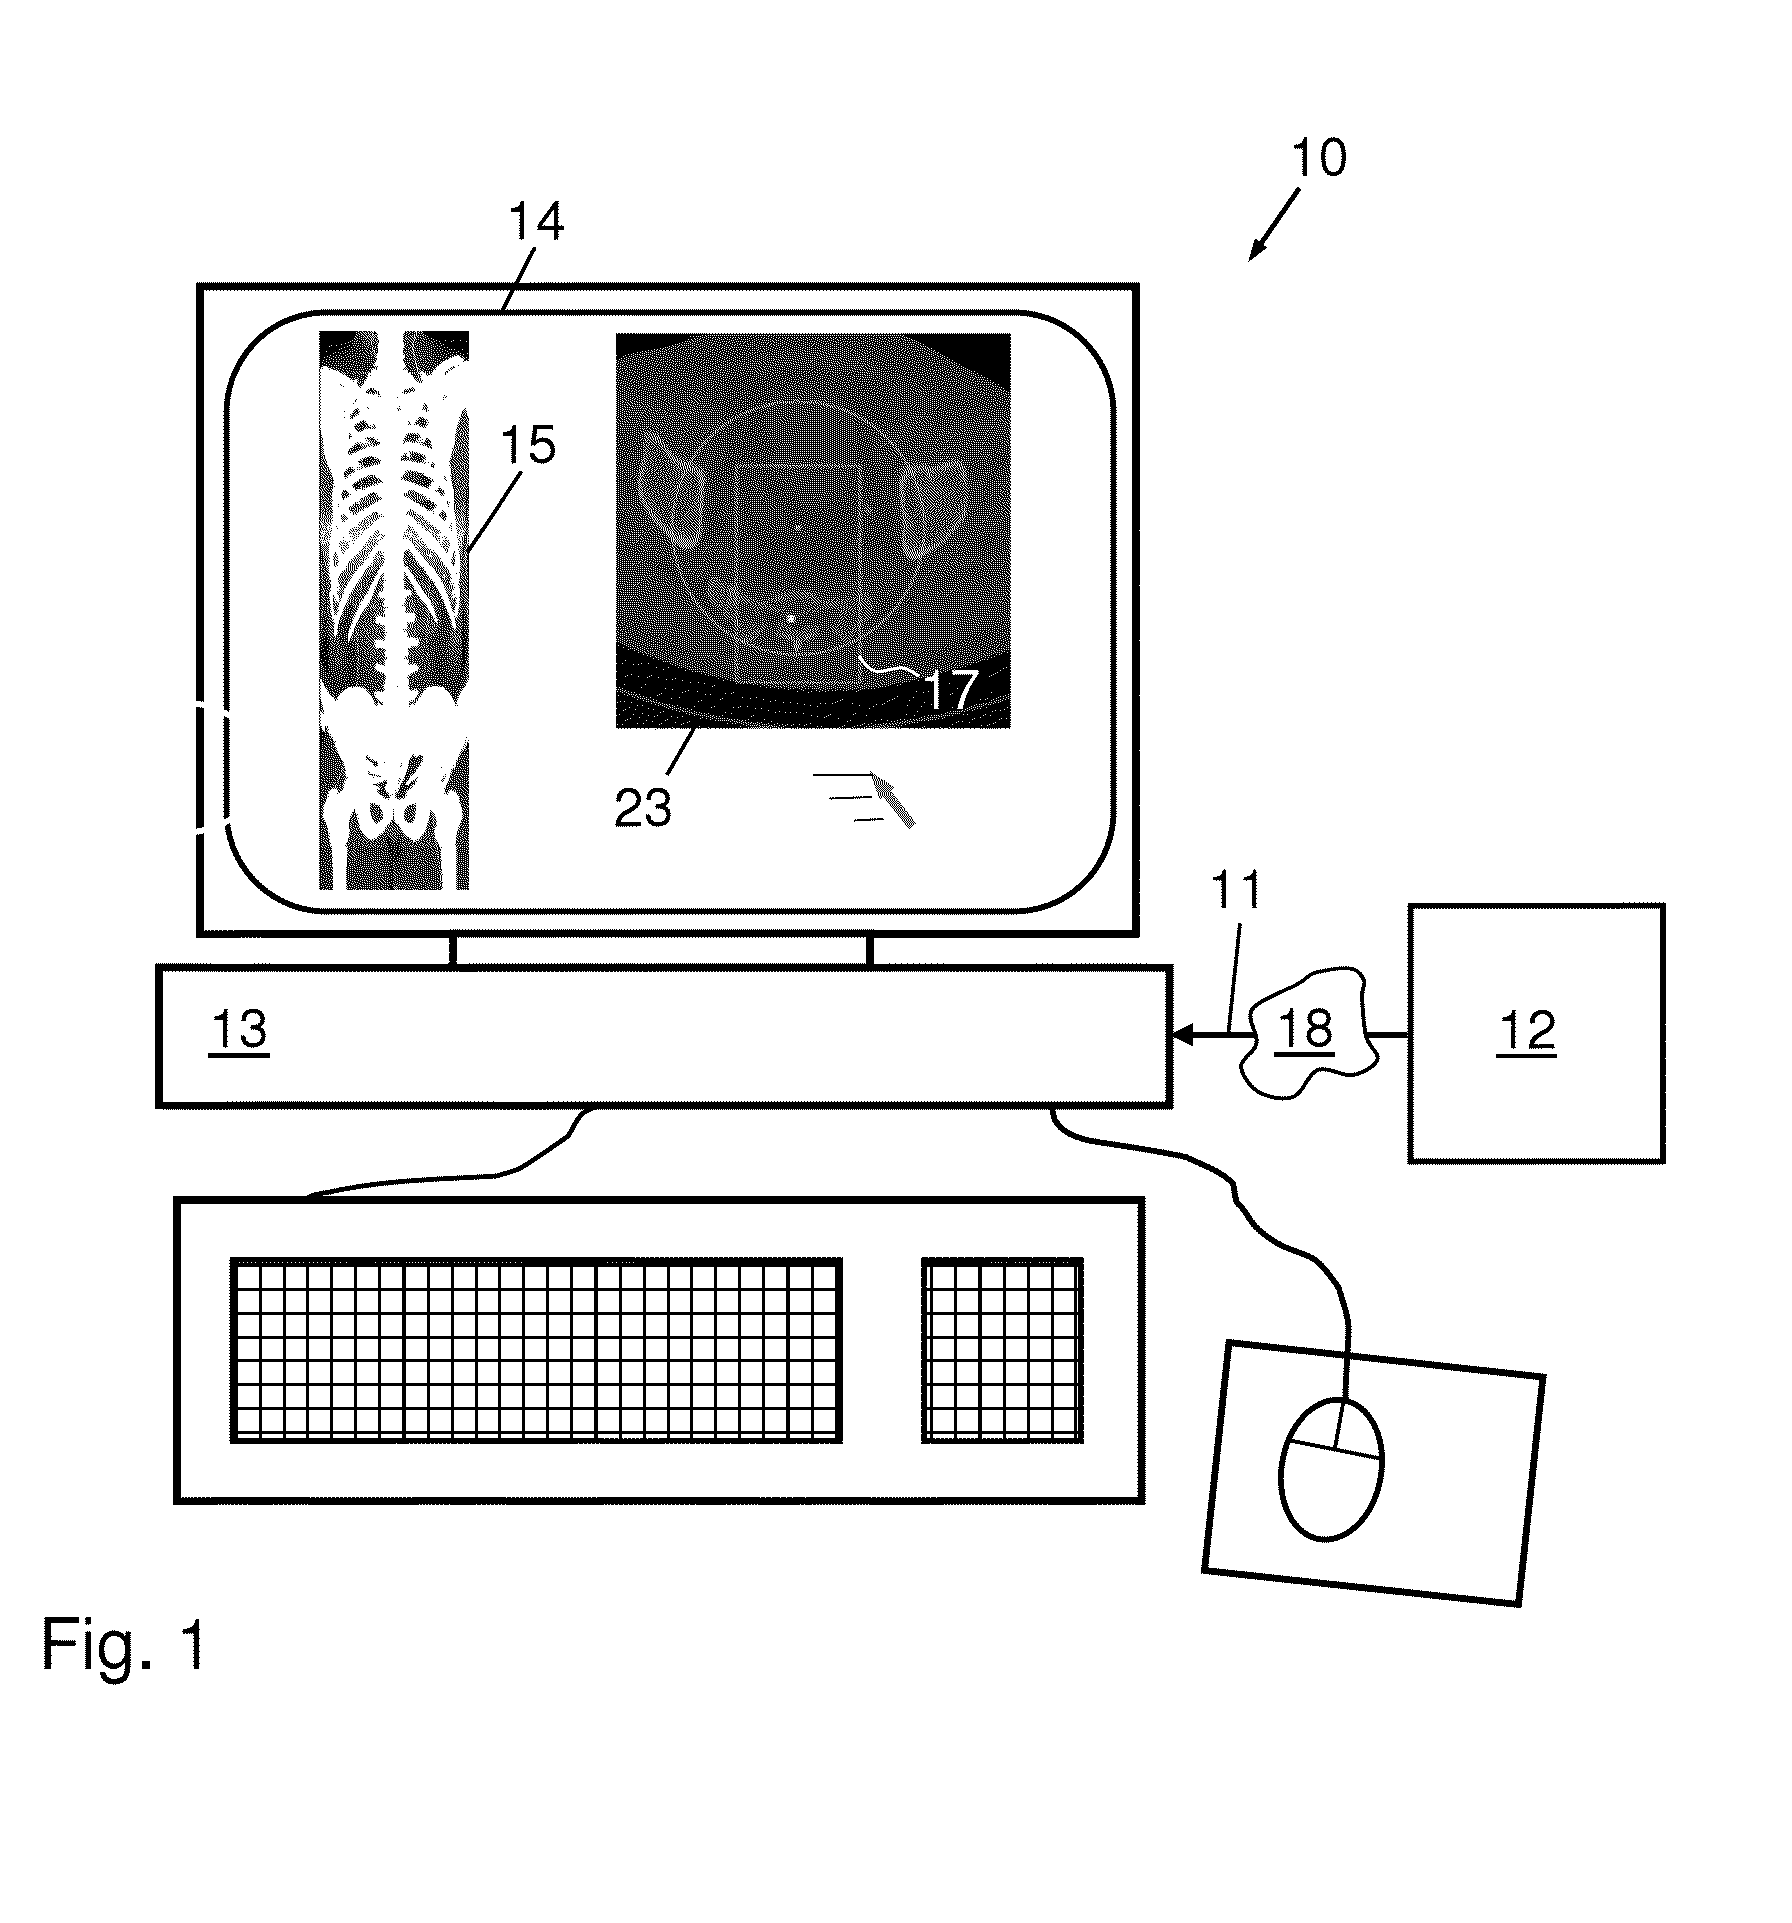 Method, apparatus and system for localizing a spine